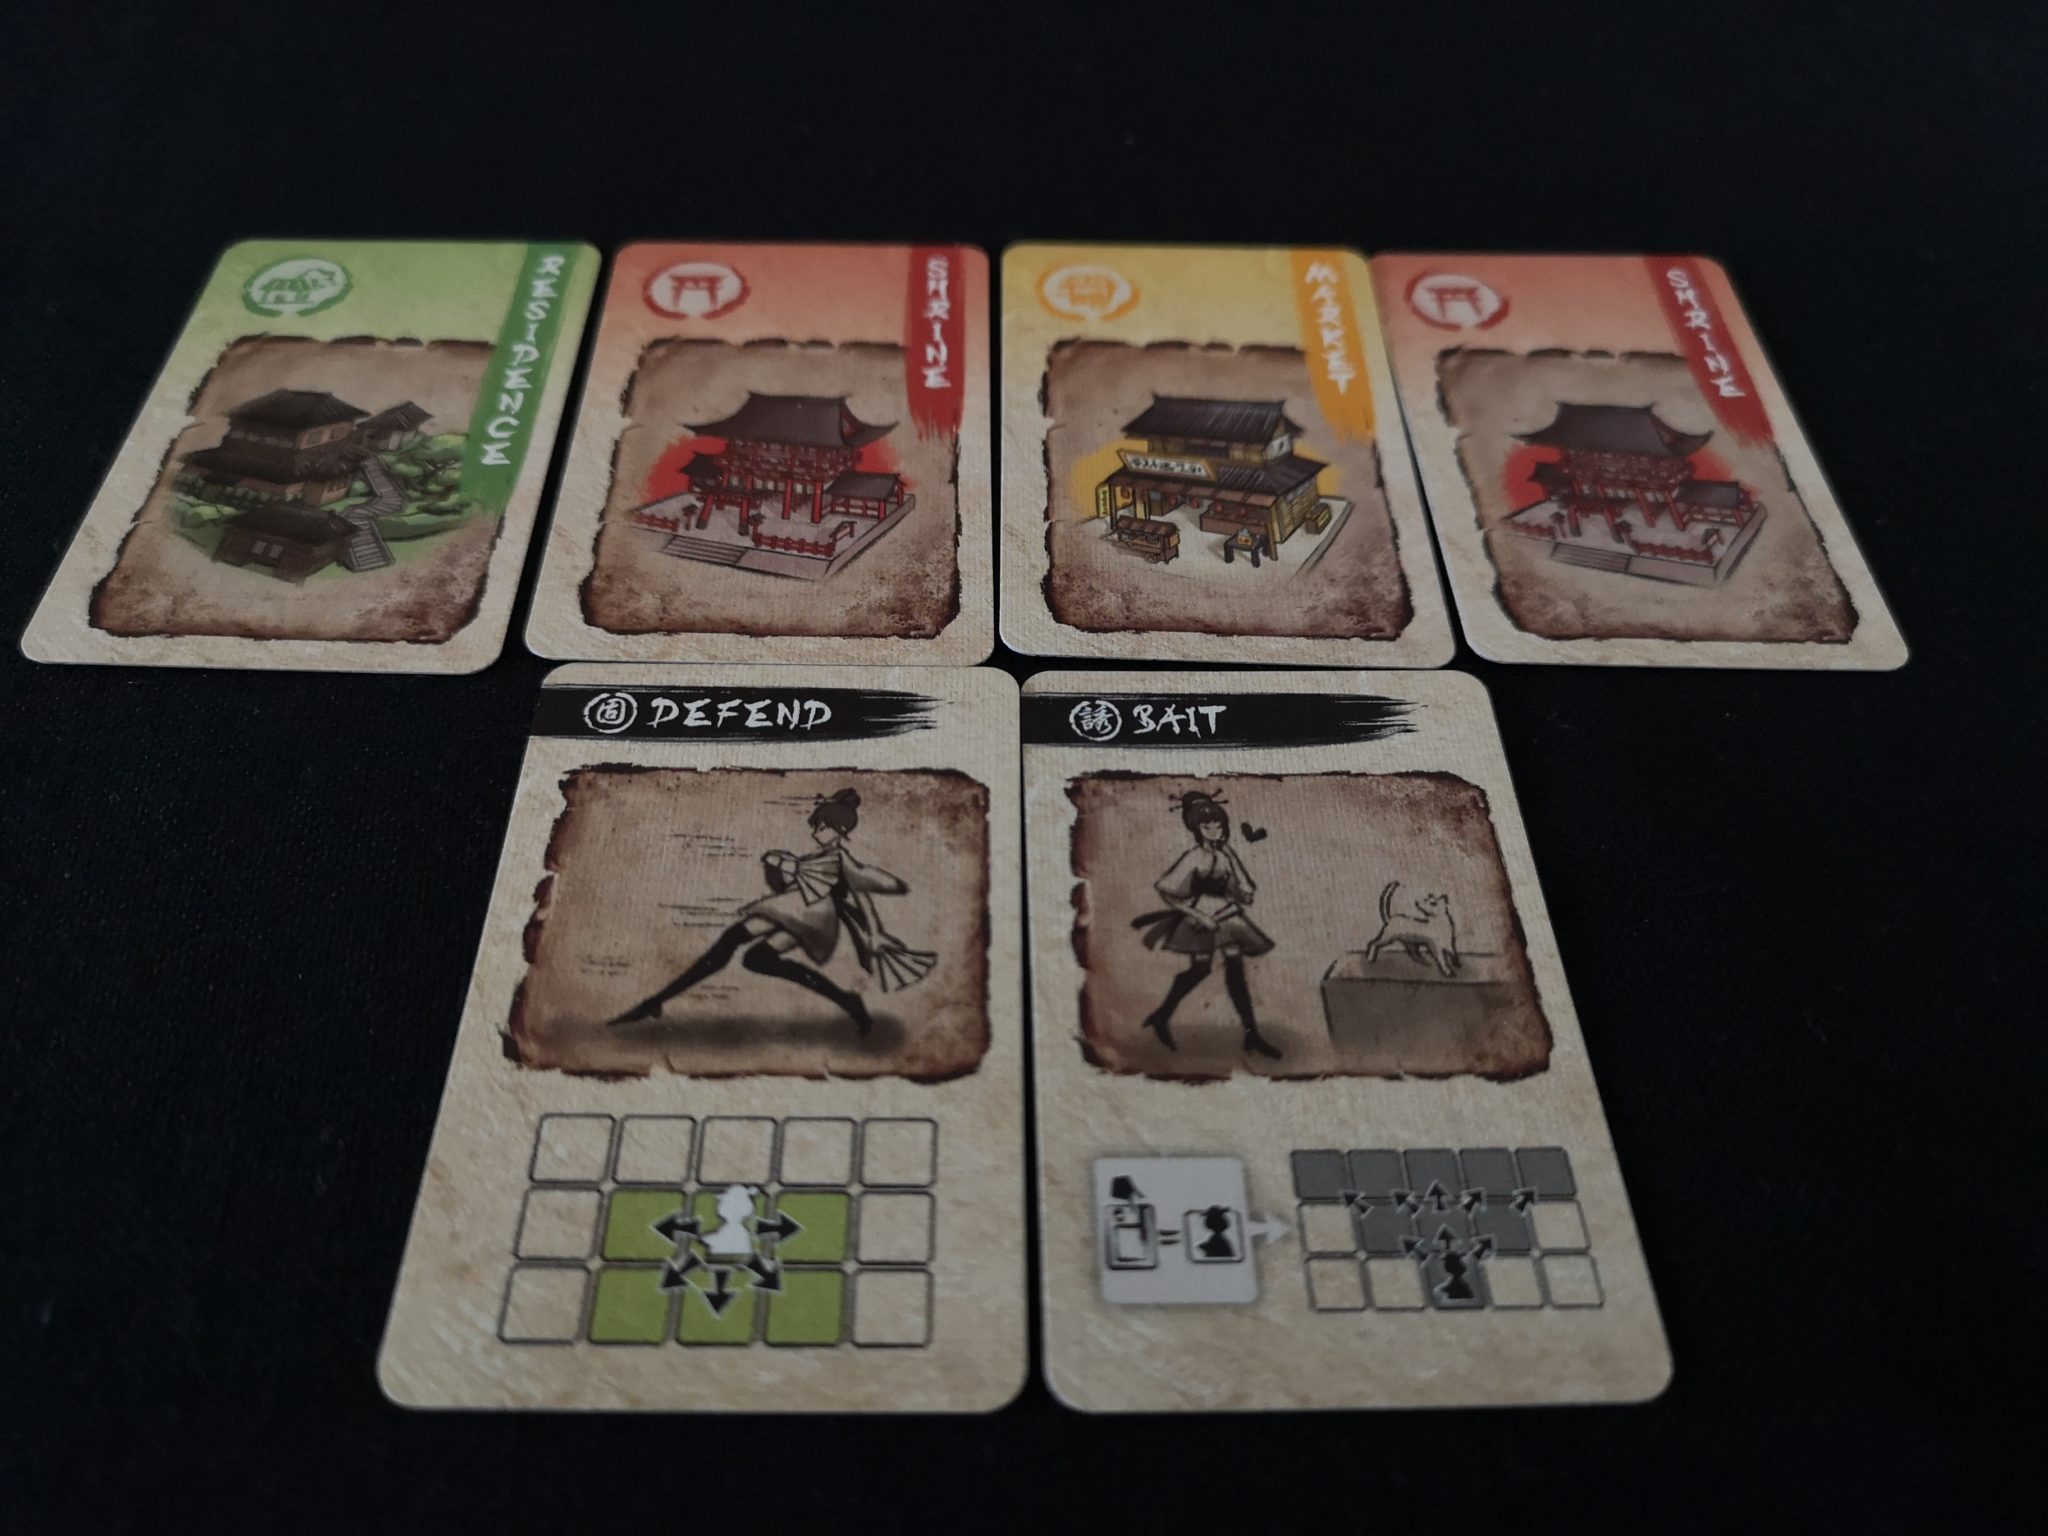 Location and Tactics cards